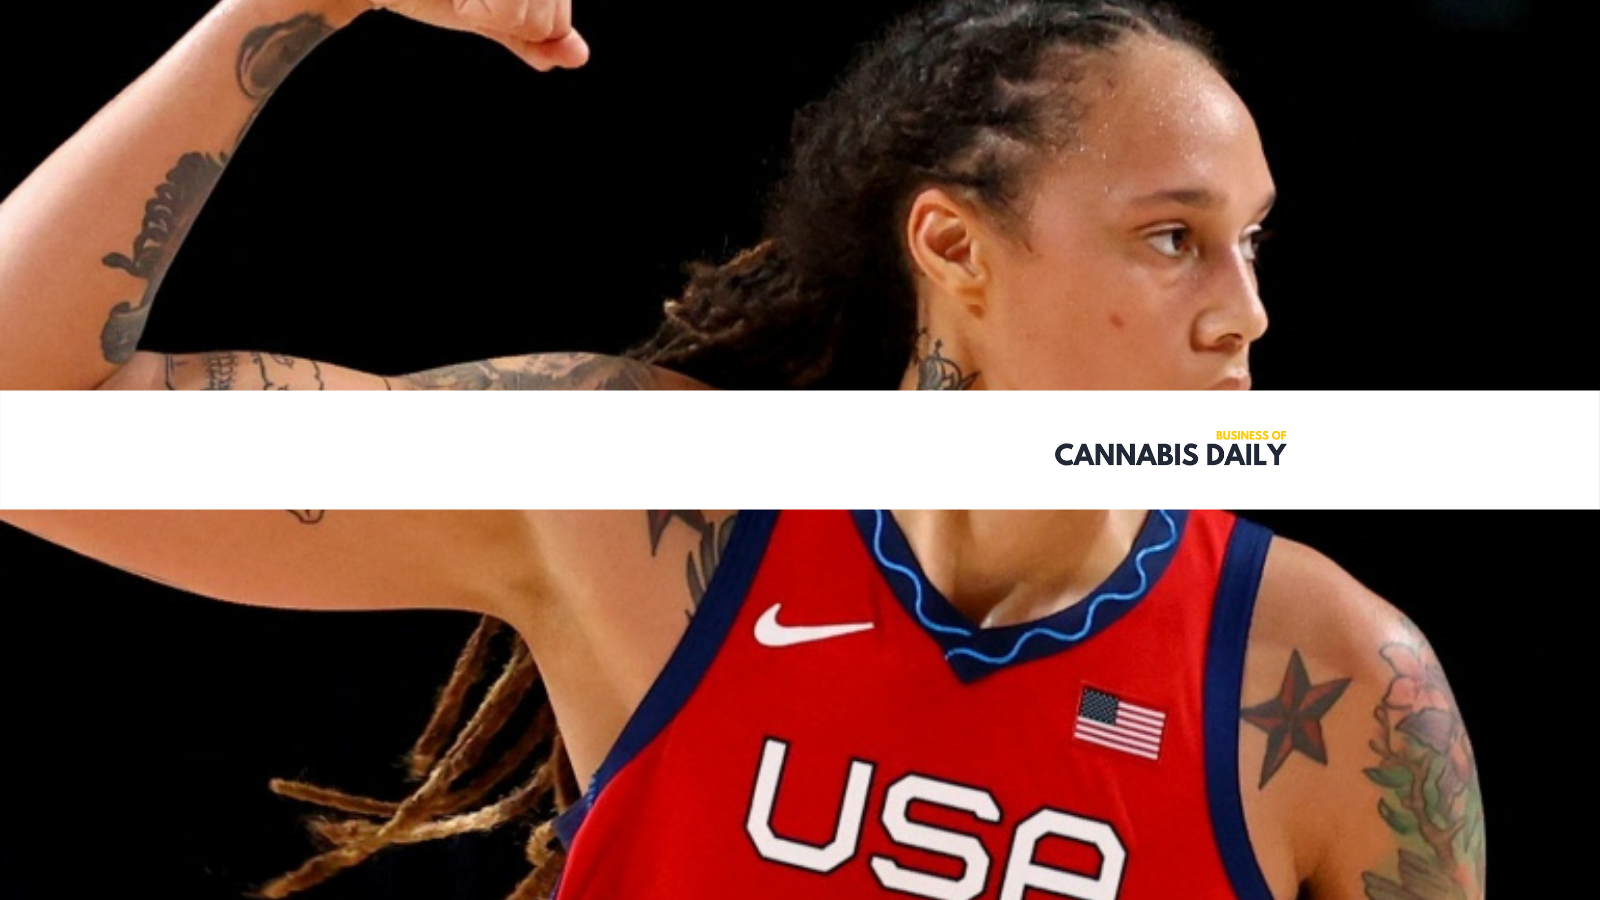 brittney griner detained in the cannabis news